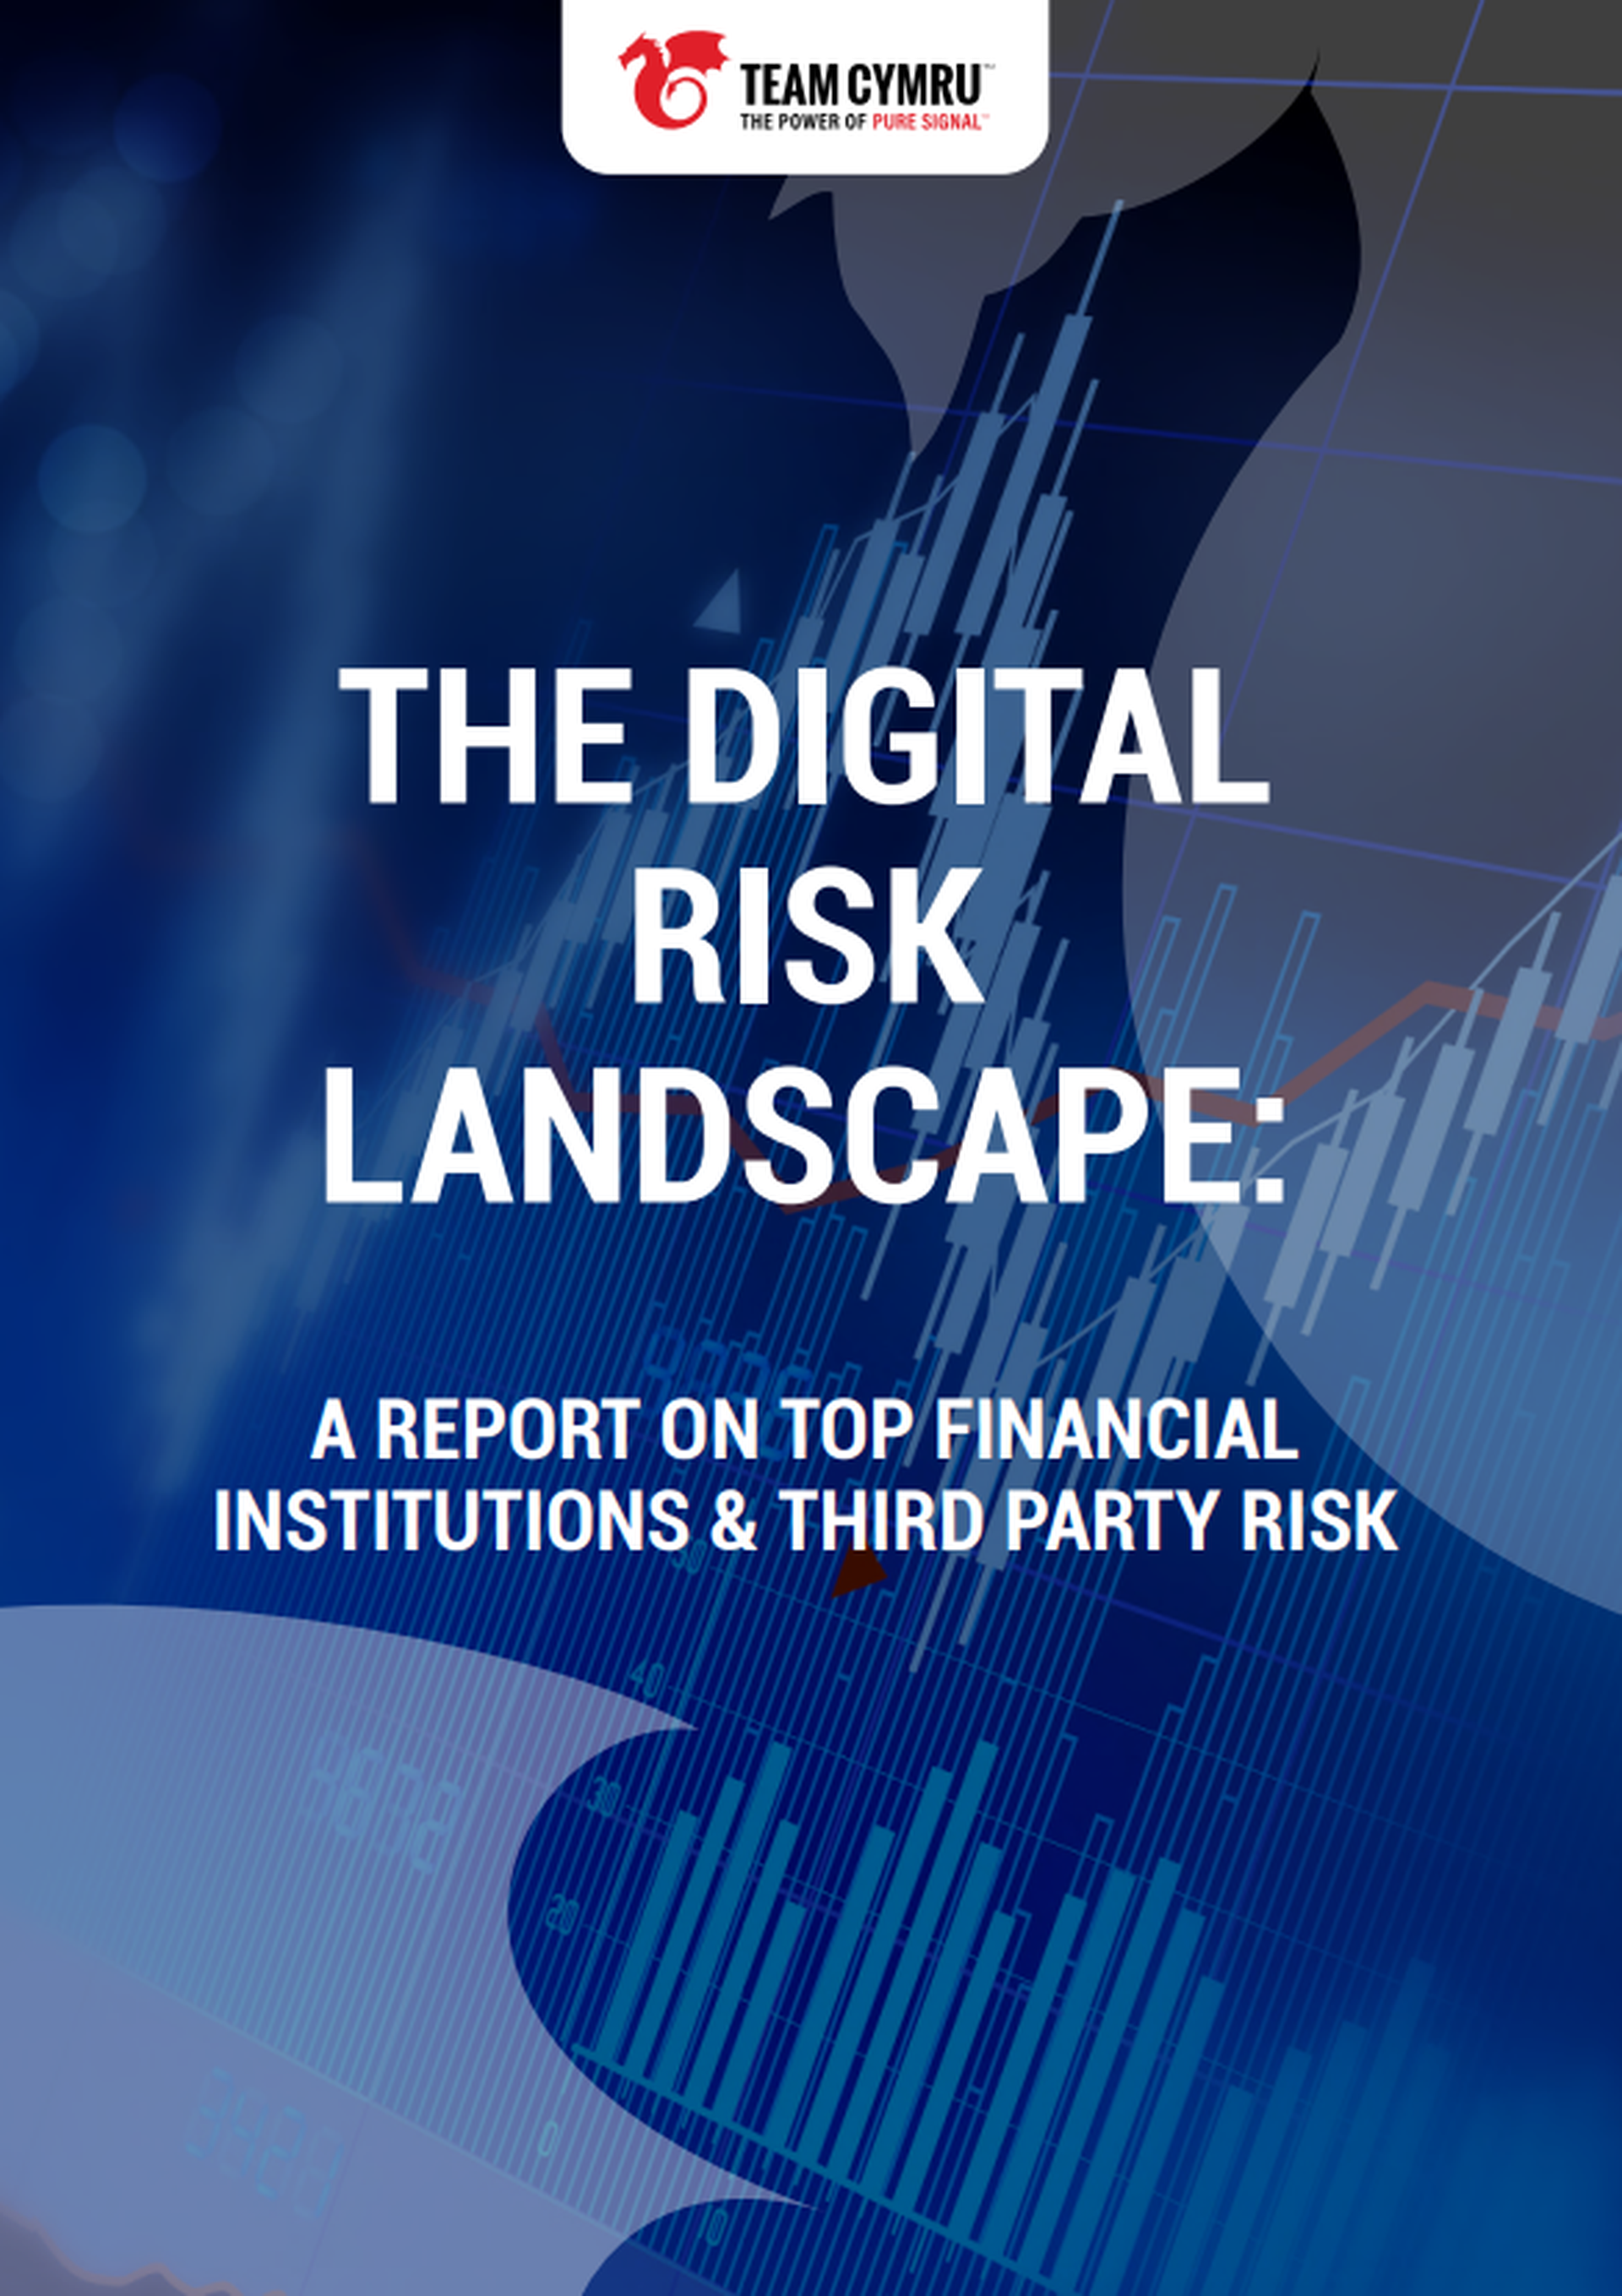 The Digital Risk Landscape: A Report on Top Financial Institutions & Third Party Risk